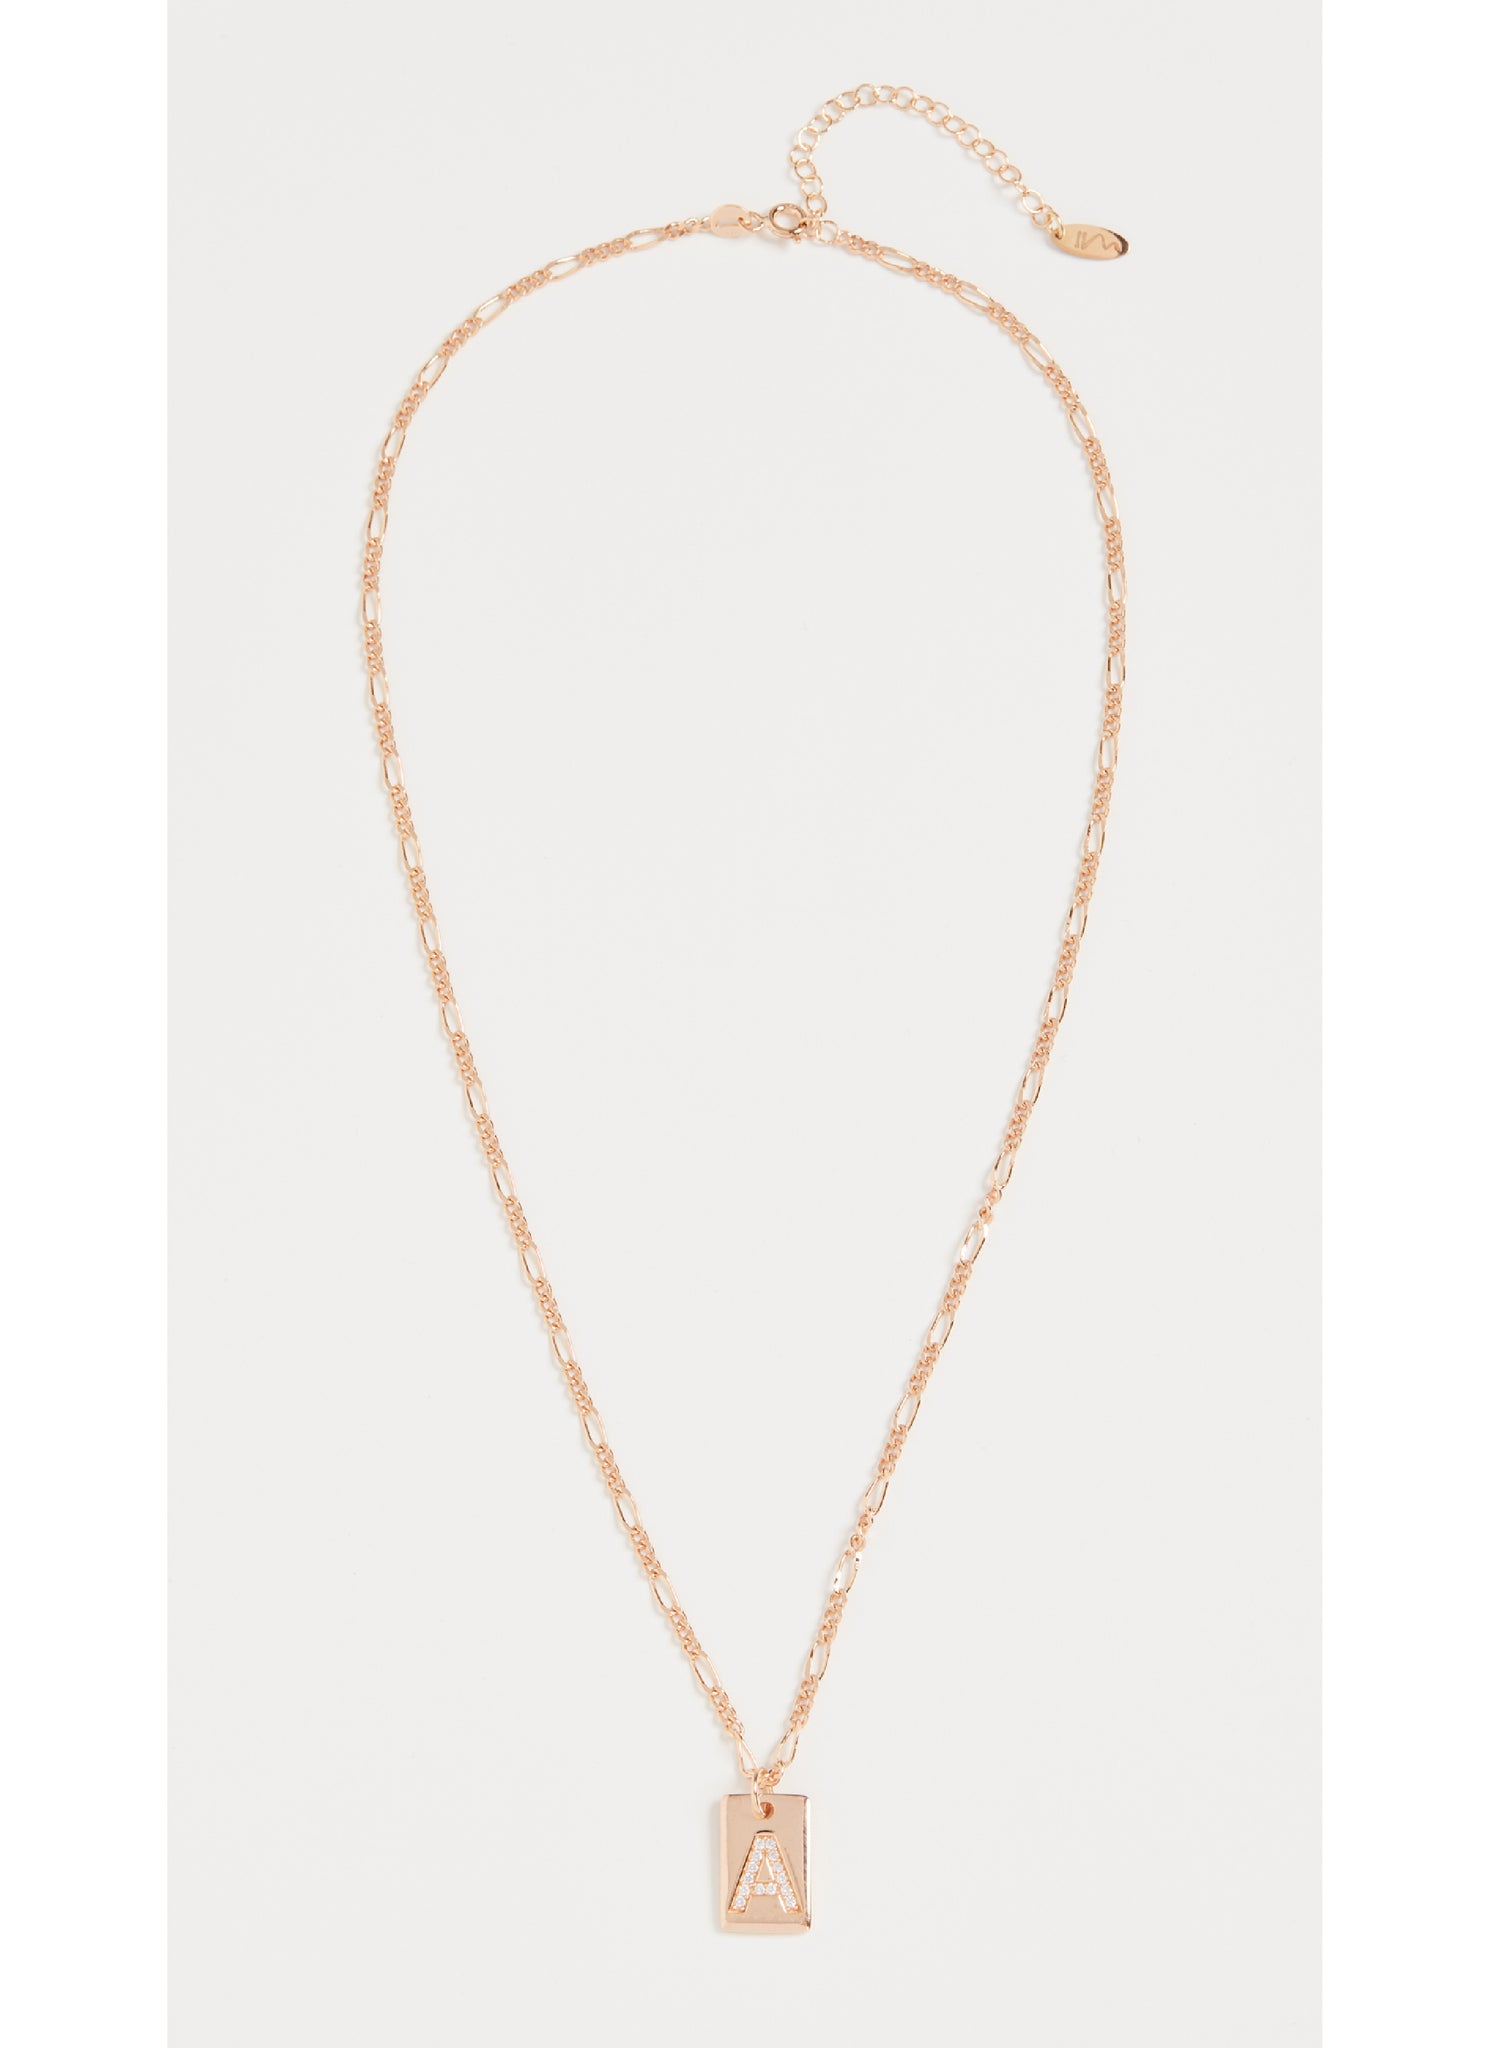 Tilly Initial Necklace in Gold